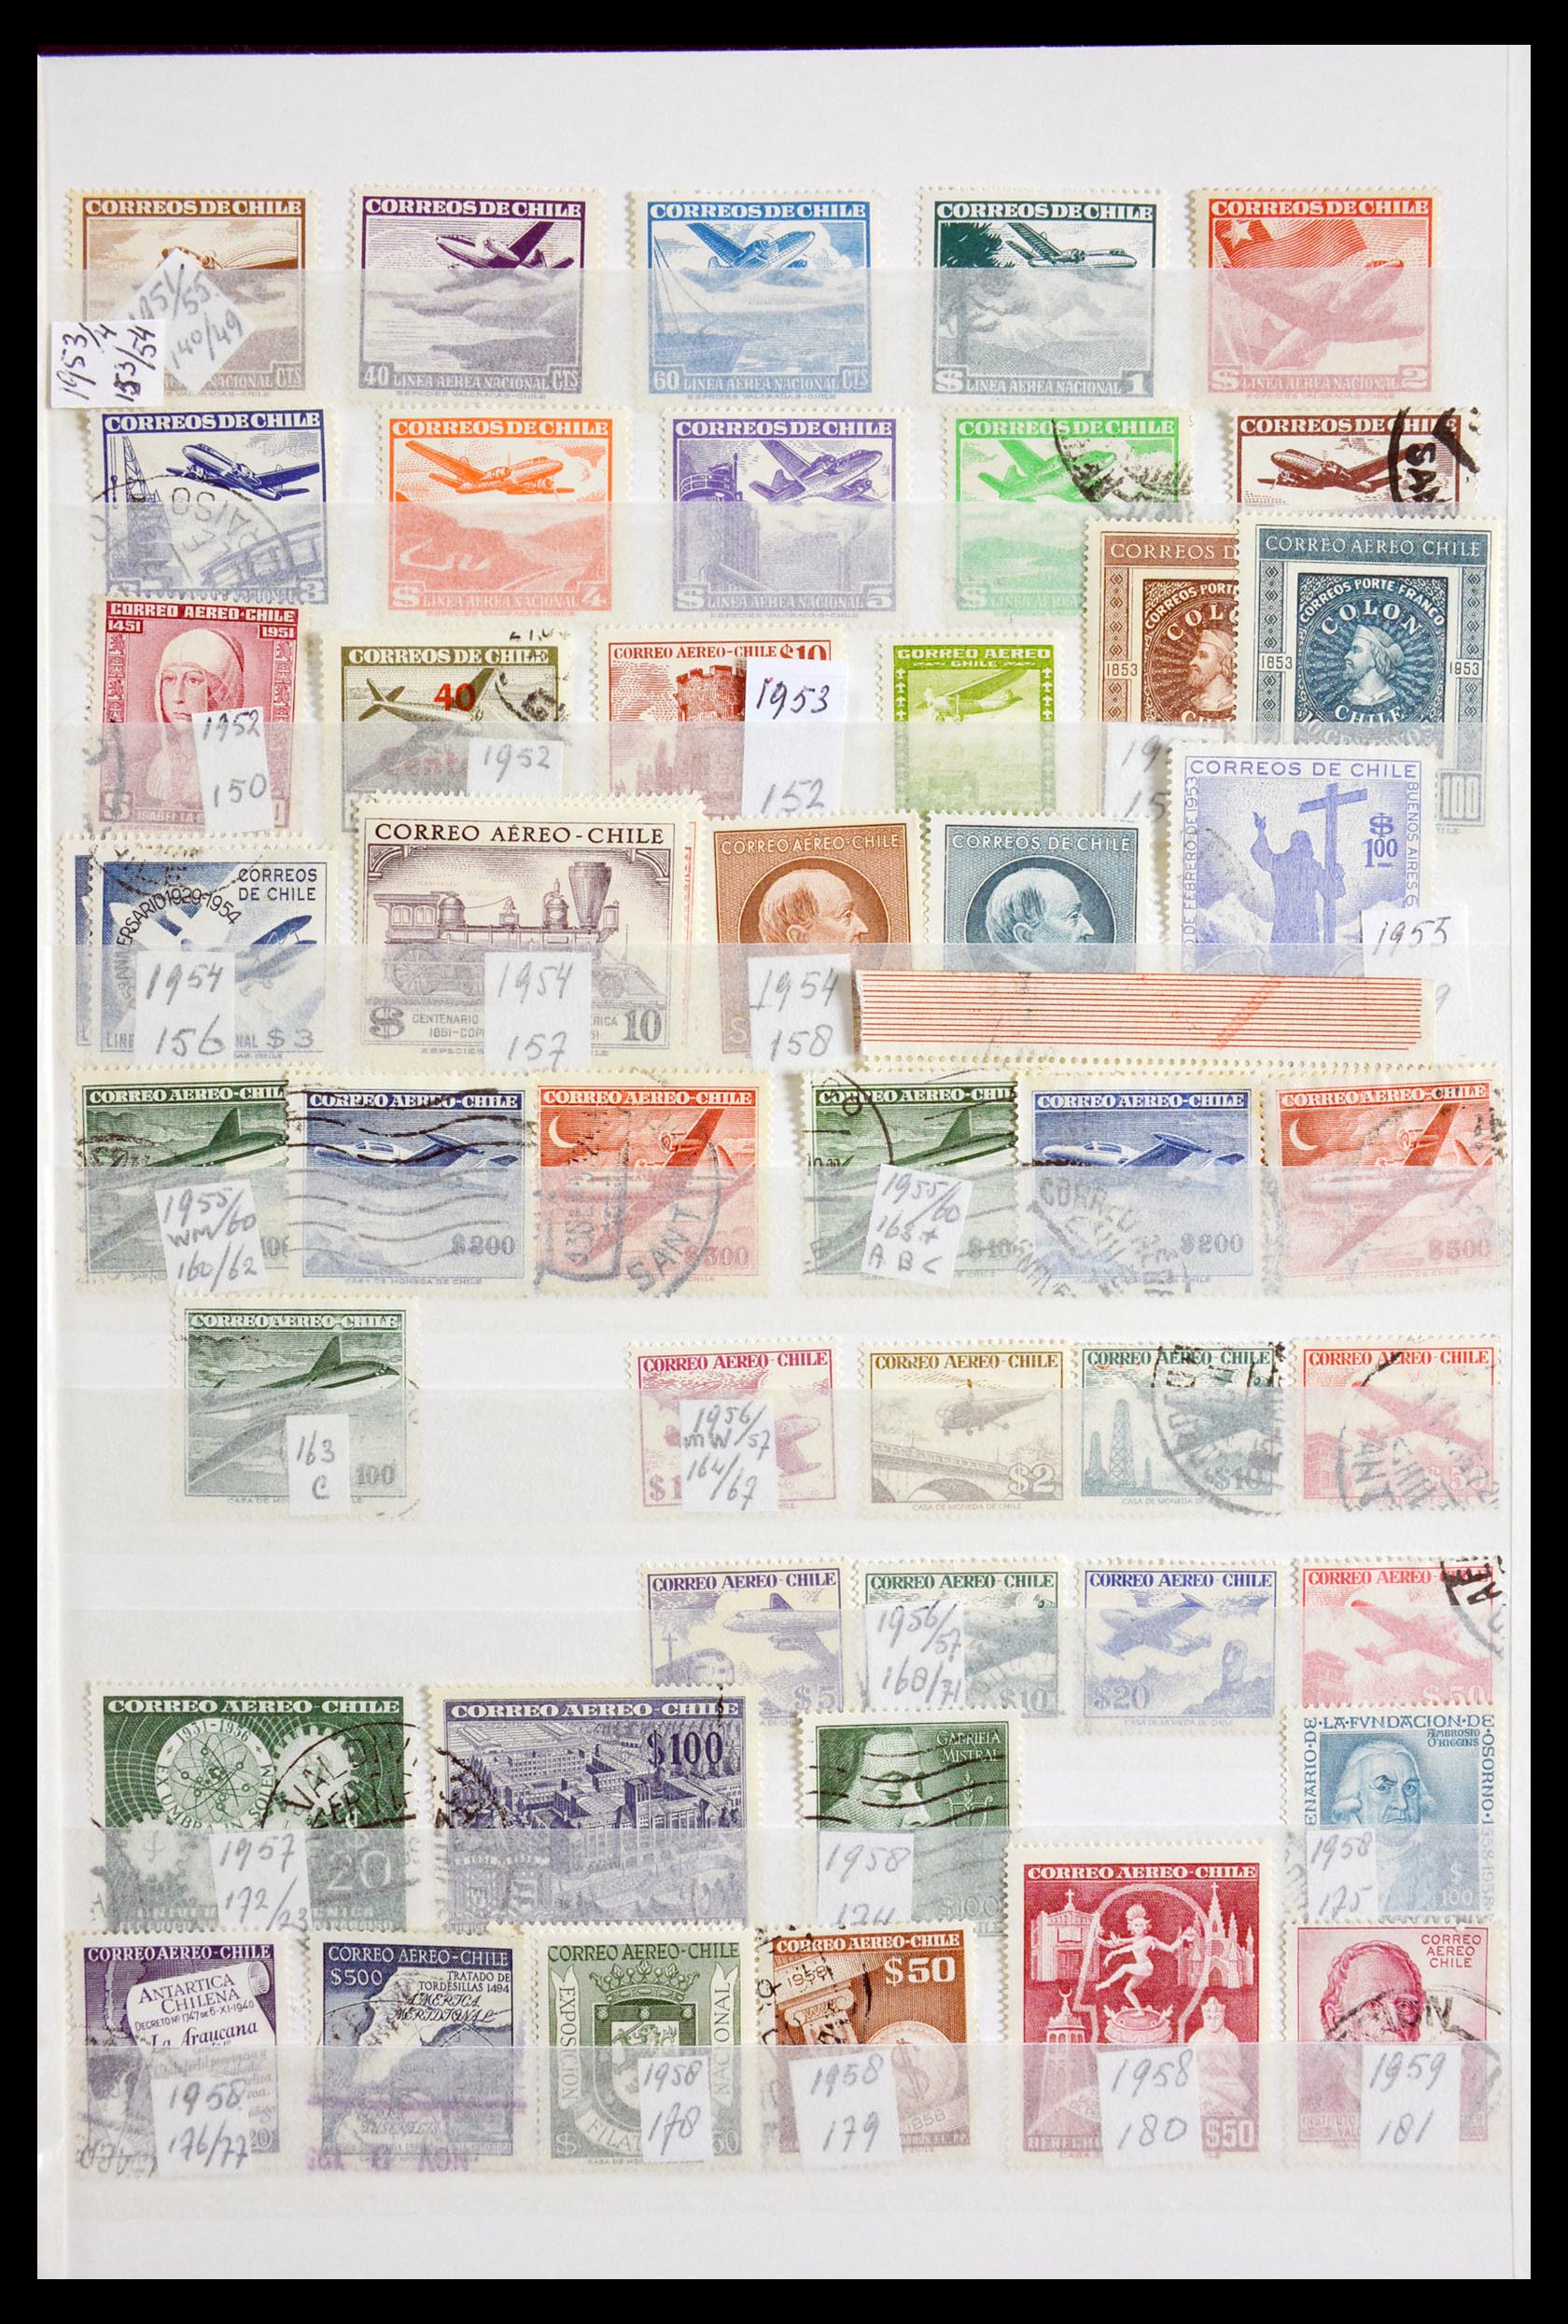 29917 037 - 29917 Latin America airmail stamps.